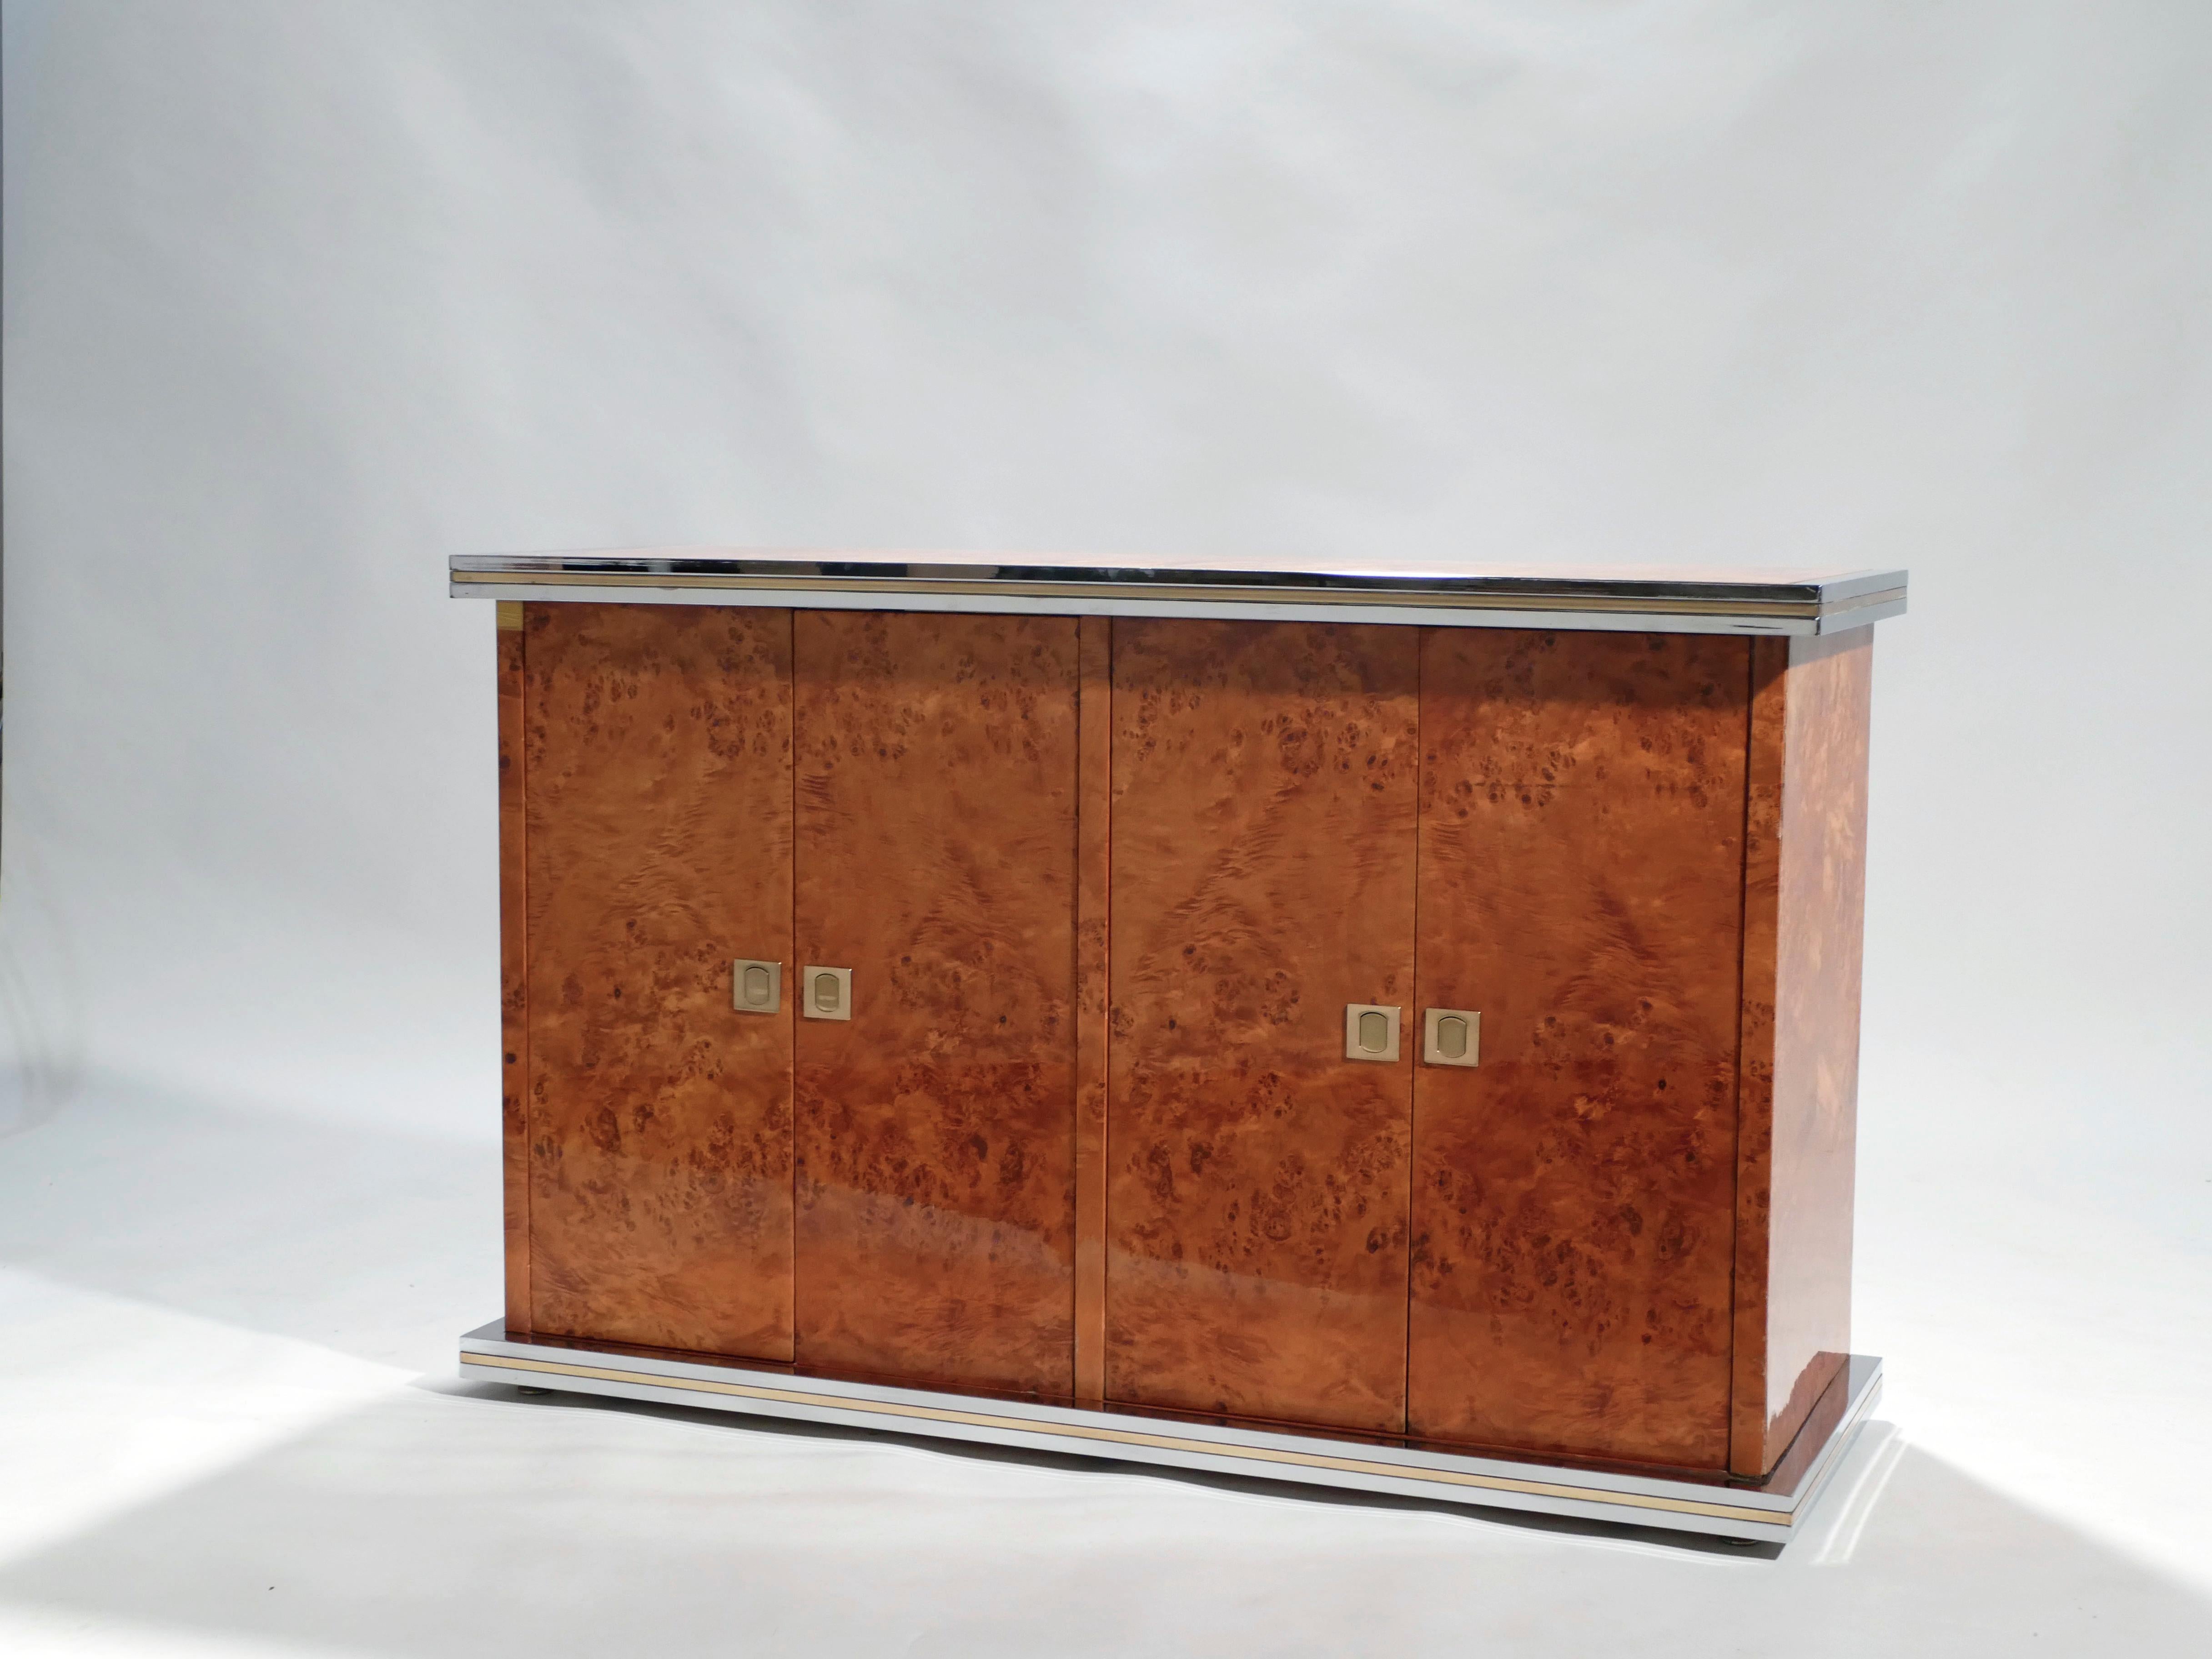 Rich burl wood is the eye-catching chief material in this beautiful, small credenza by Willy Rizzo. The wood sides and top swirl and ripple into shades of caramel and coffee brown, for a warm, glossy look. Brass and chrome accents, along the clean